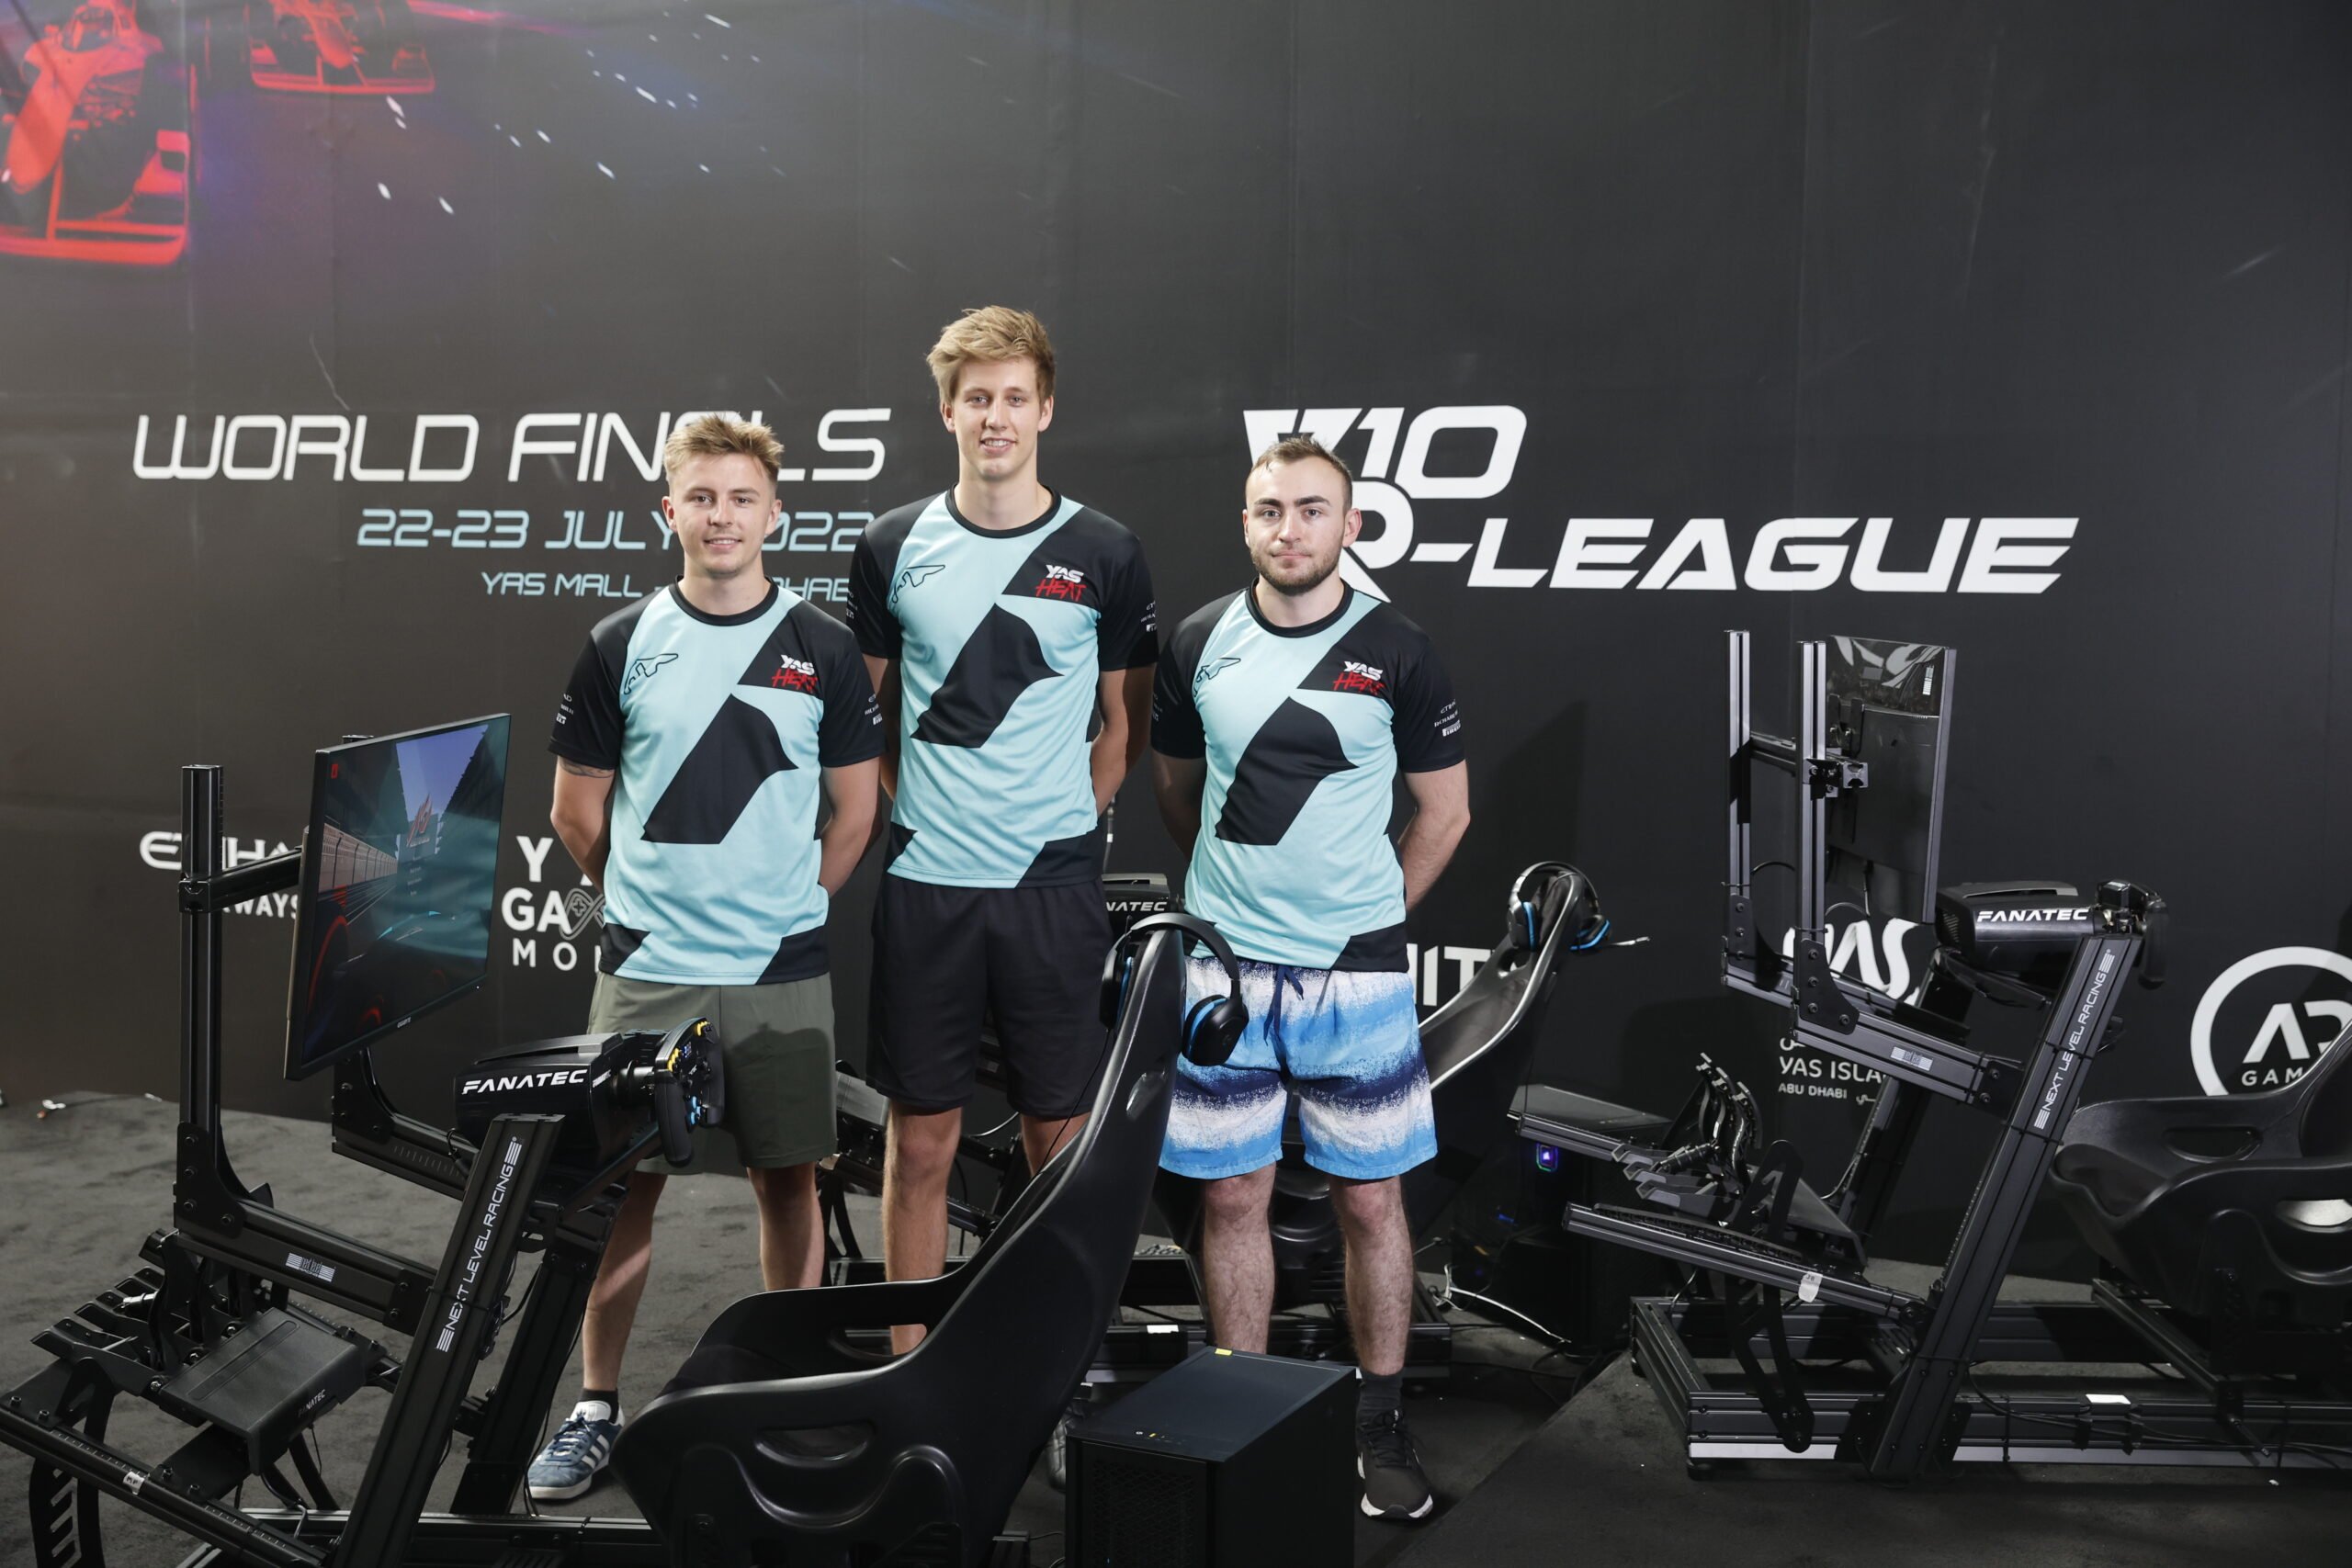 YAS HEAT ESPORTS GEAR UP FOR V10 R-LEAGUE WORLD FINALS LIVE ON HOME SOIL